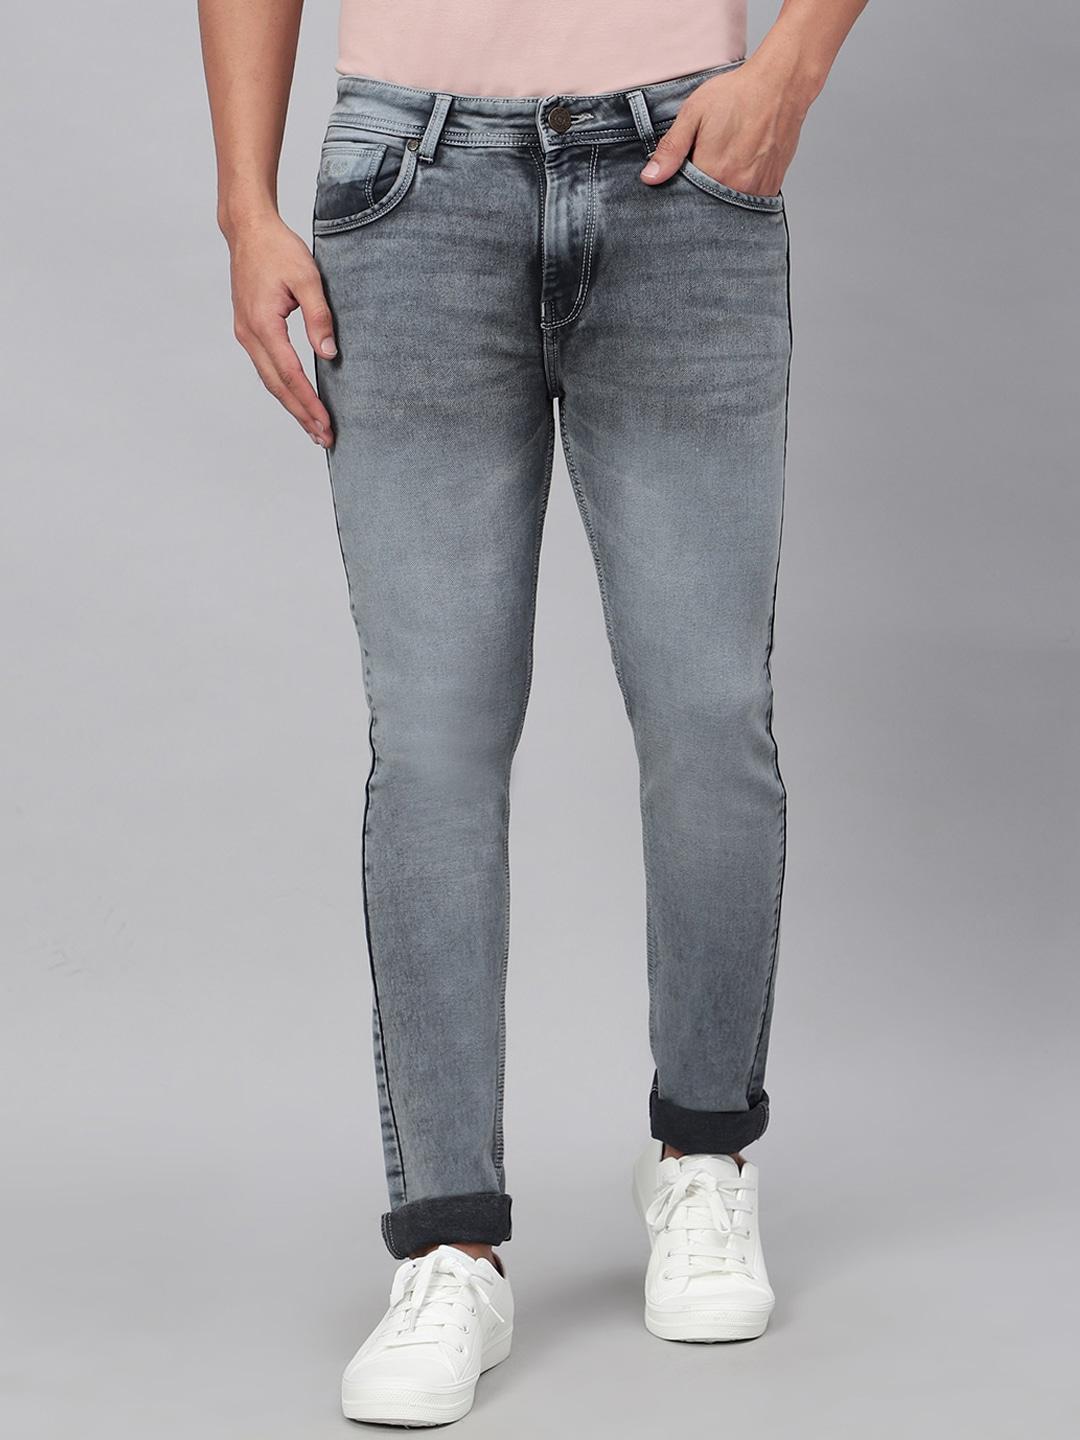 hj hasasi men relaxed fit heavy fade stretchable jeans